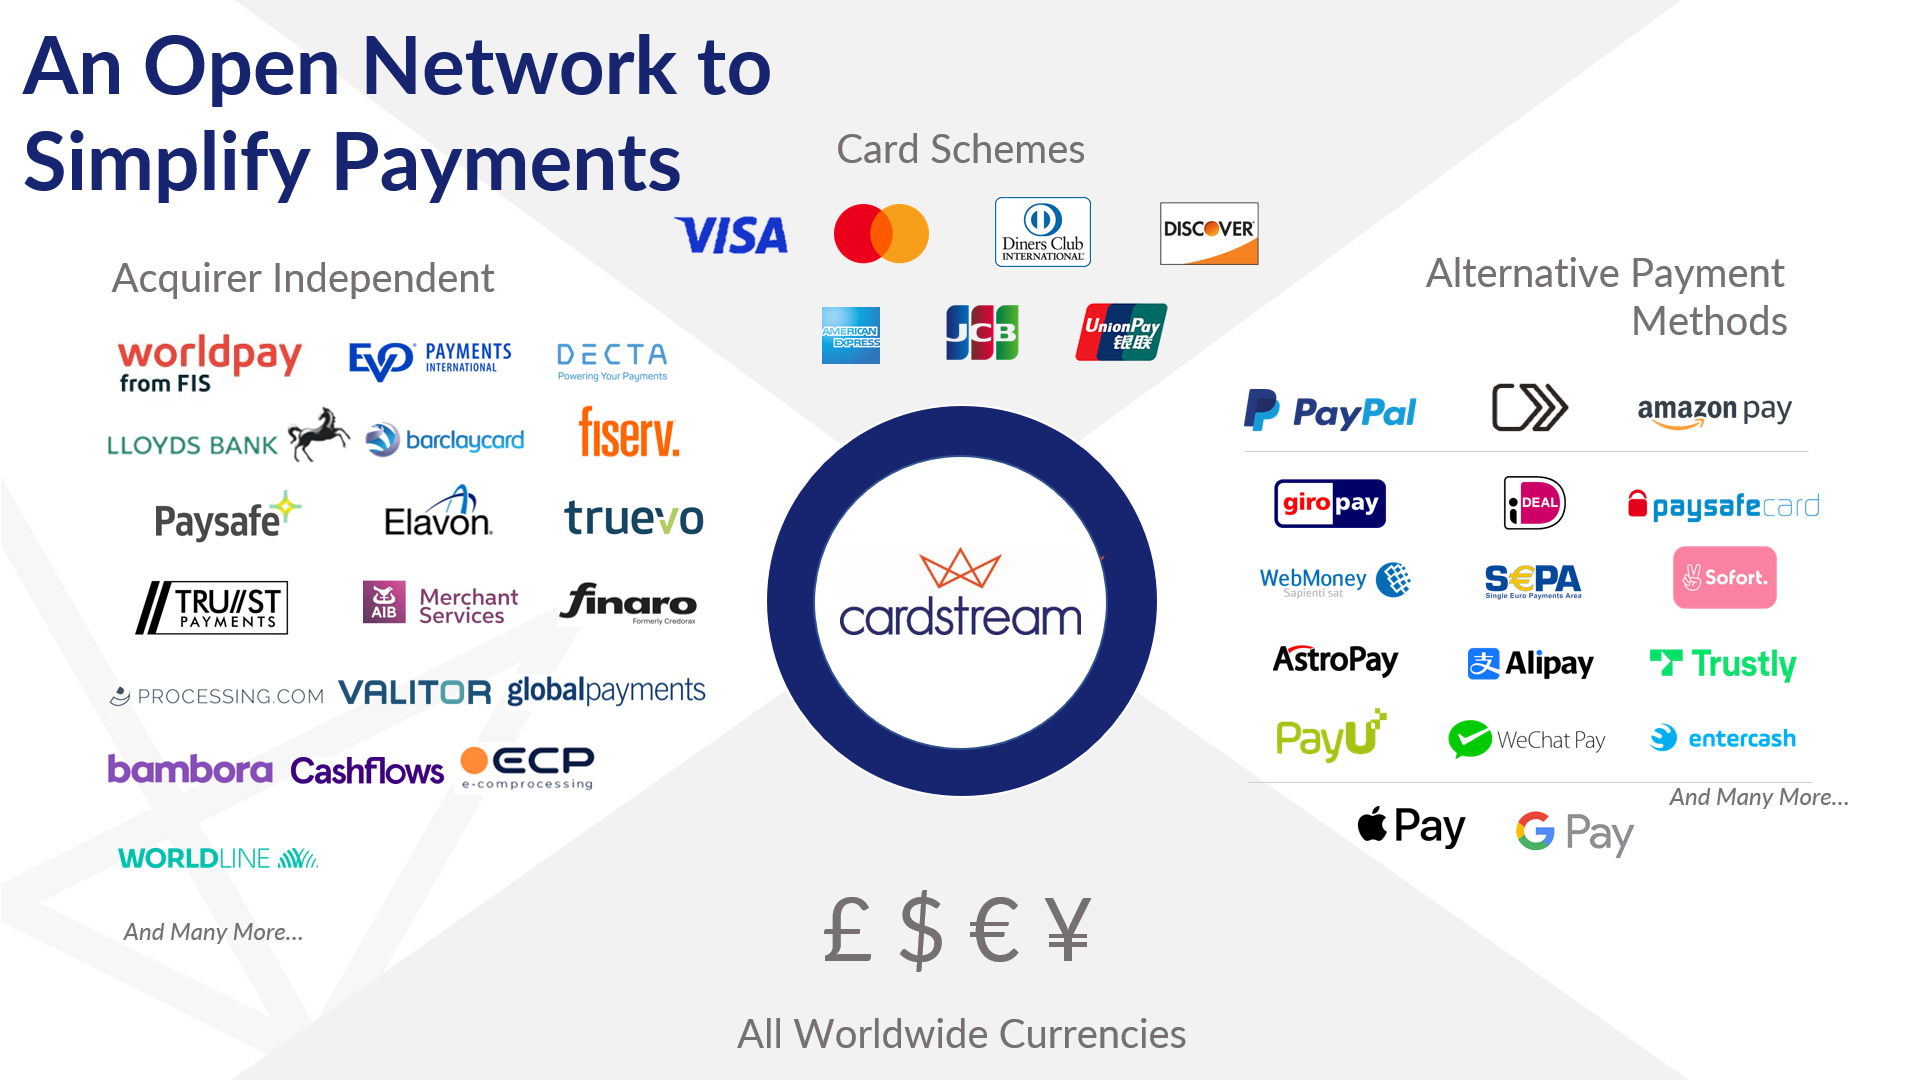 The Open®Payment Network